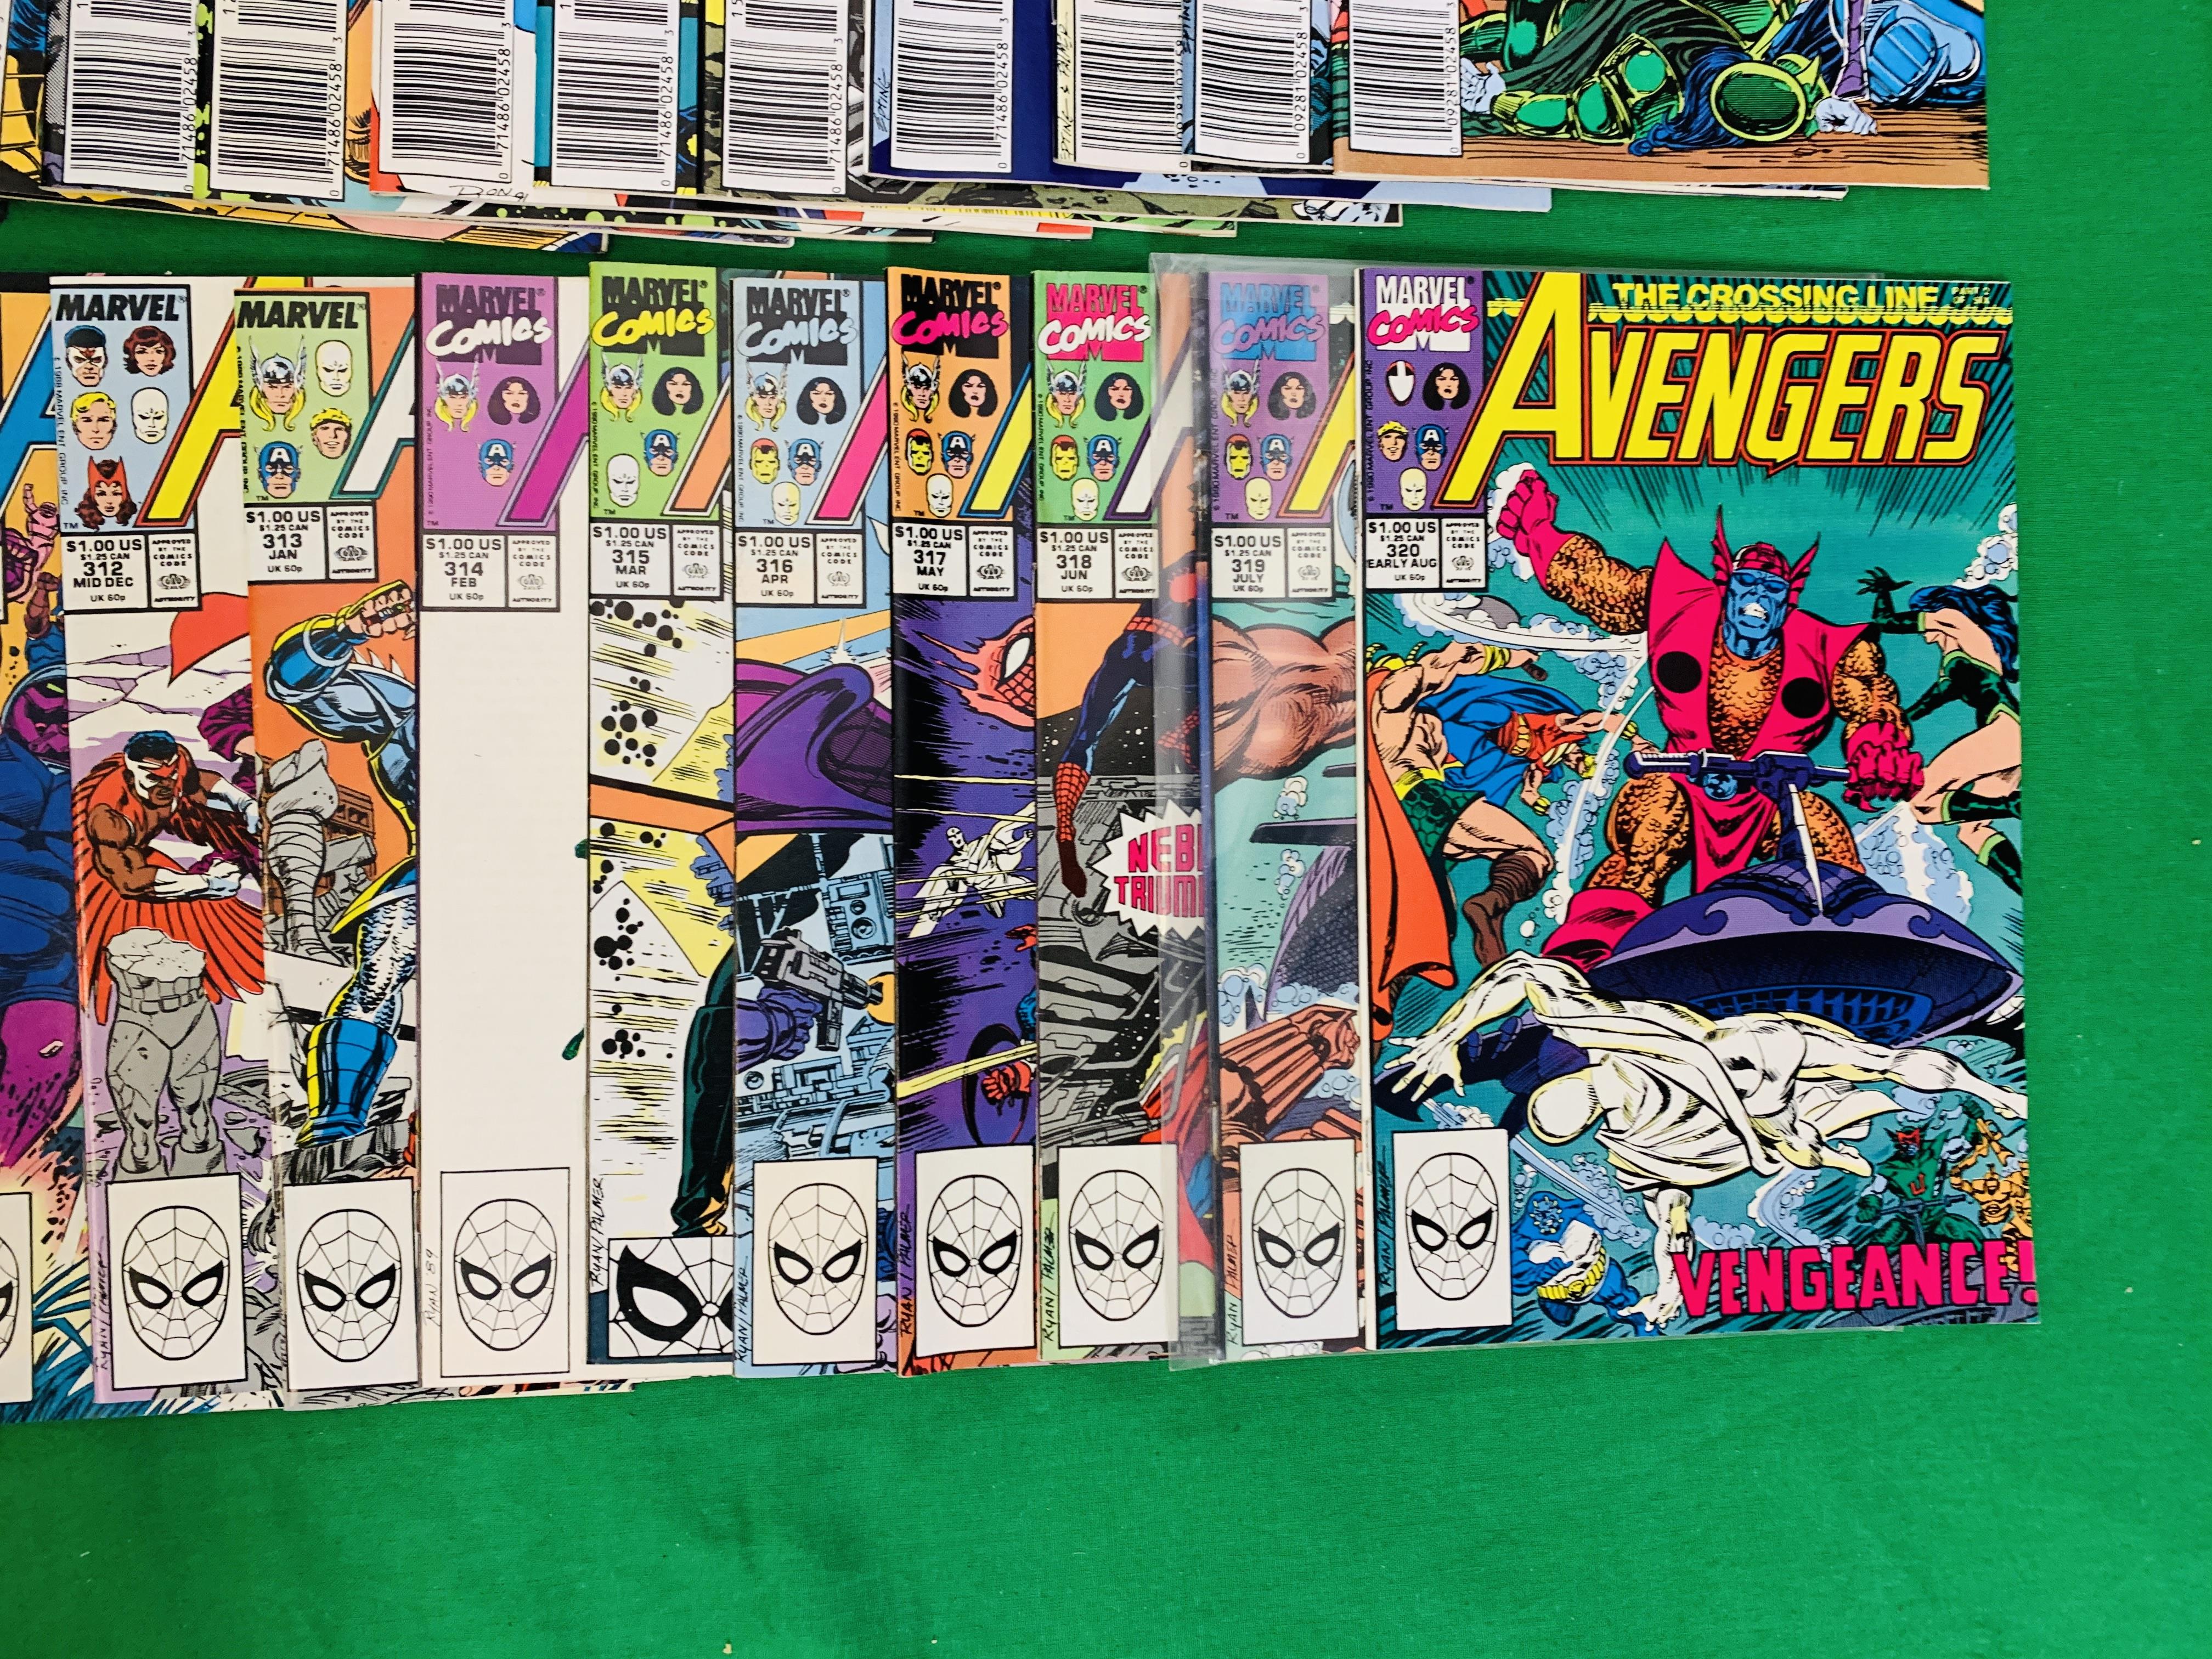 MARVEL COMICS THE AVENGERS NO. 300 - 402, MISSING ISSUES 325, 329 AND 334. - Image 4 of 16